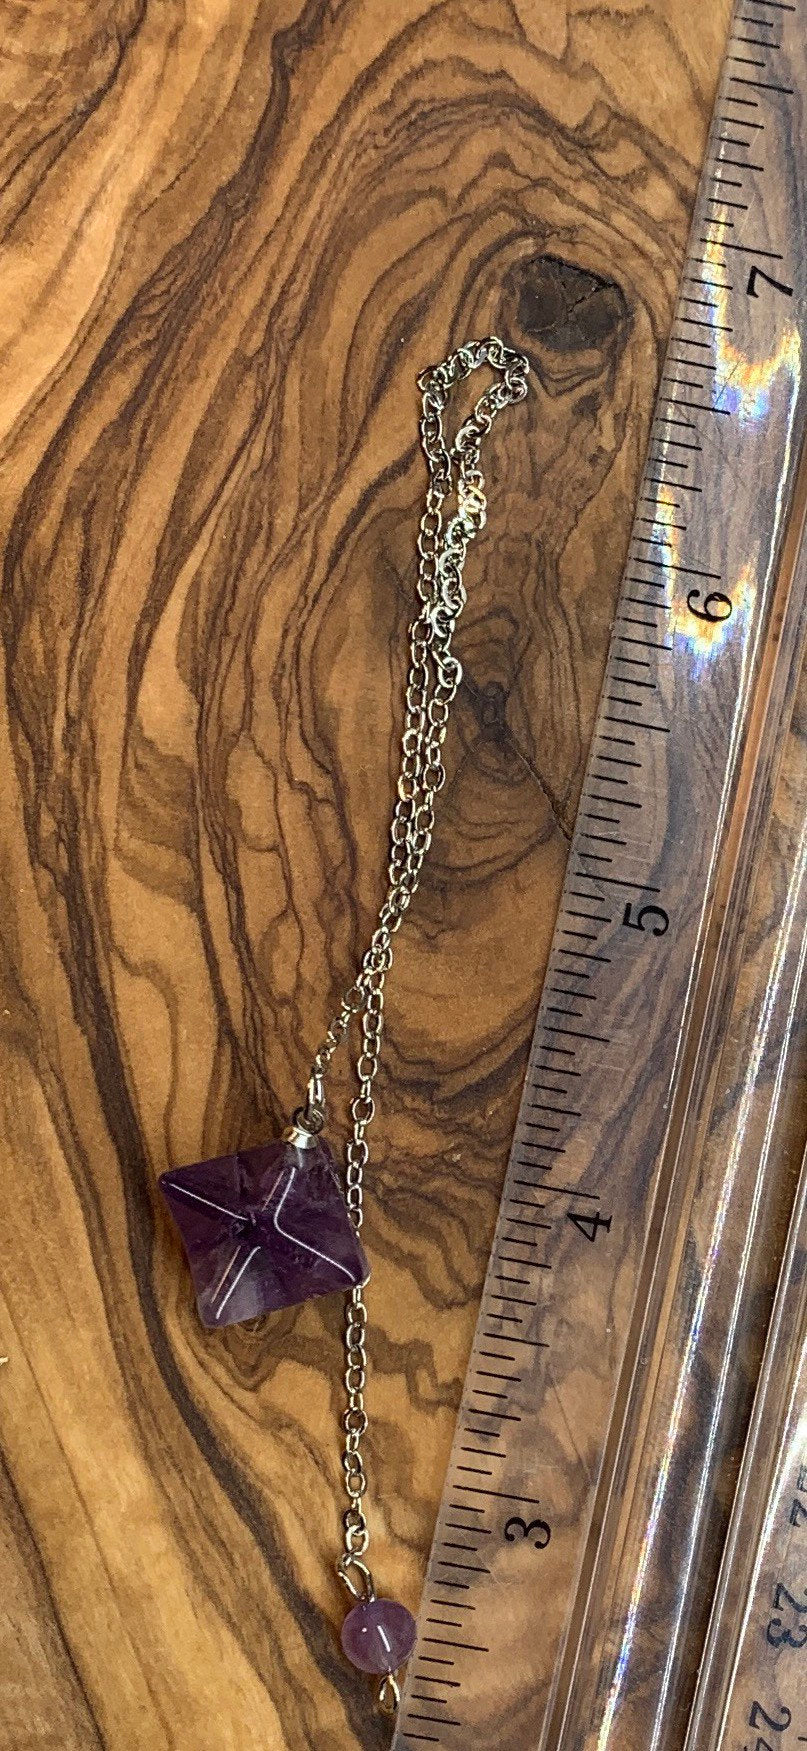 3/4 inch amethyst merkaba pendulum attatched to an 8 inch silver chain displayed next to a ruler